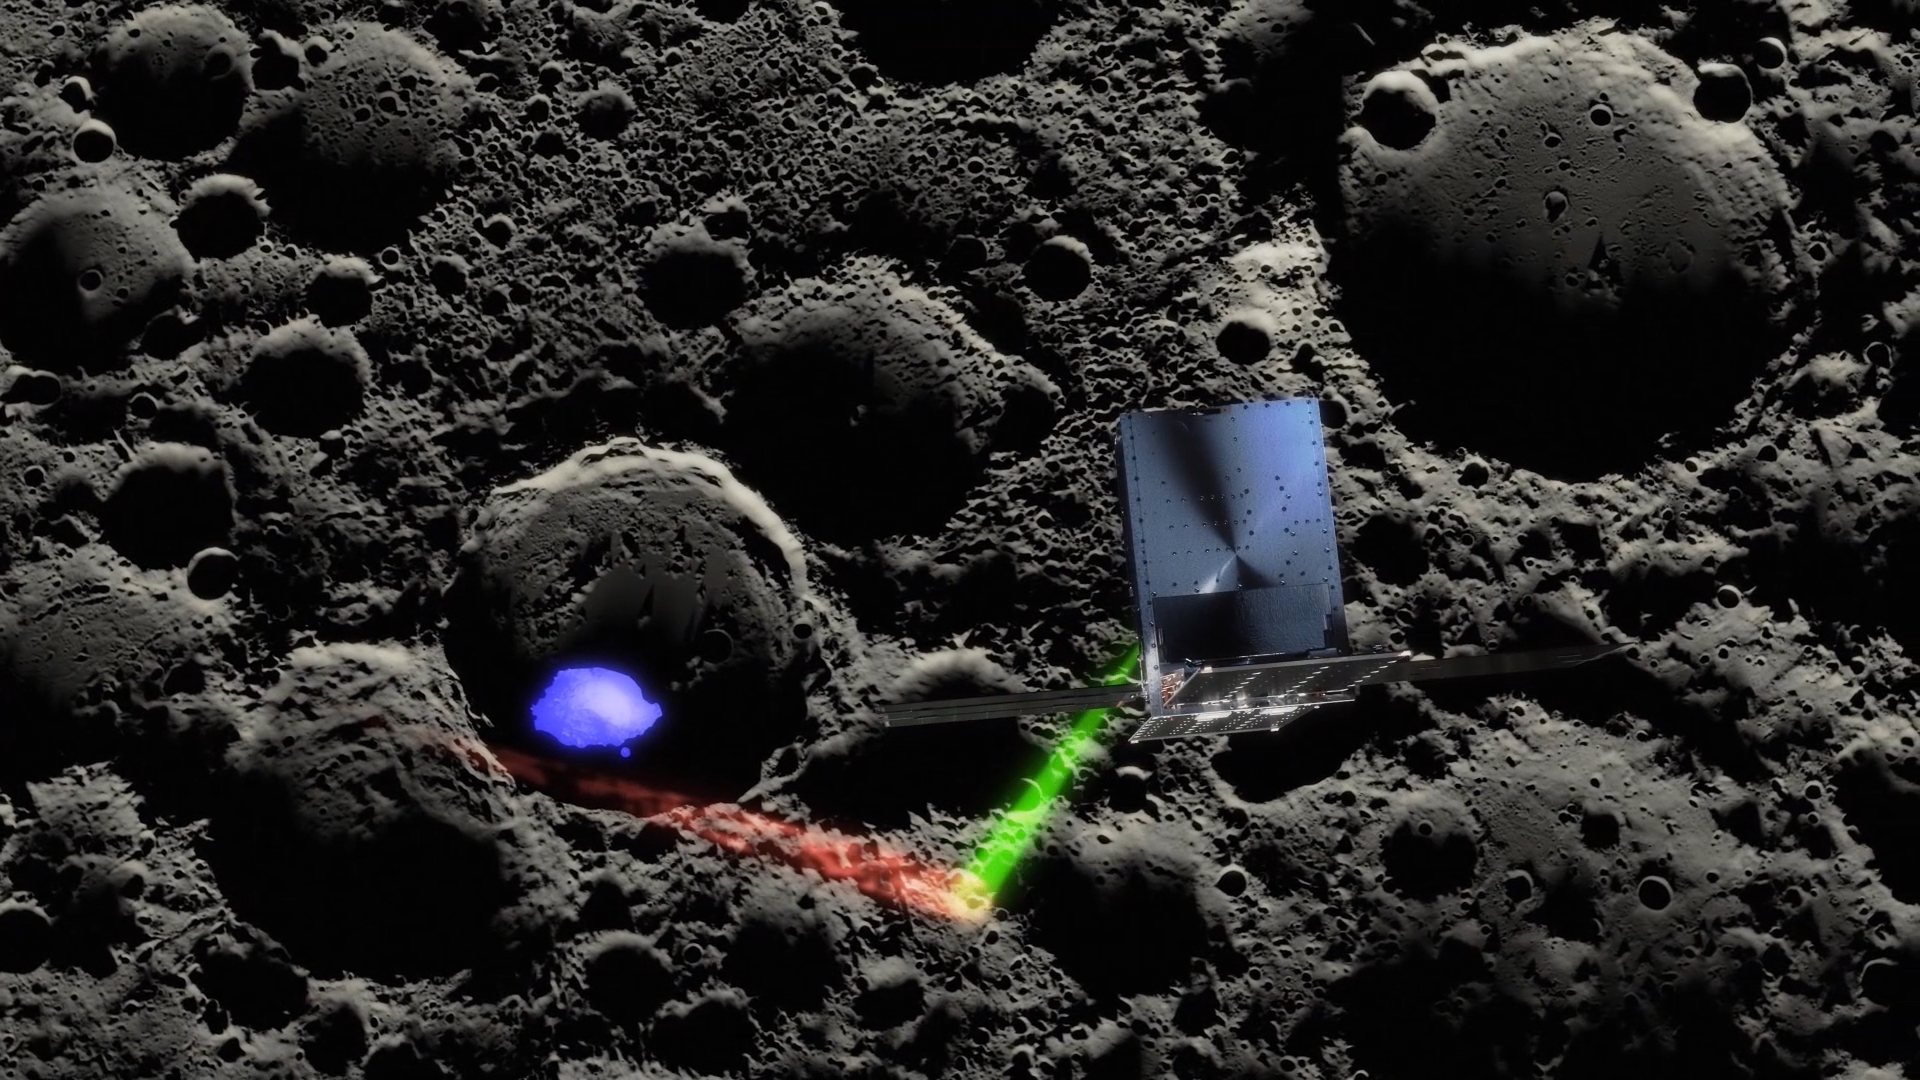 Illustration showing lasers aimed at the lunar surface